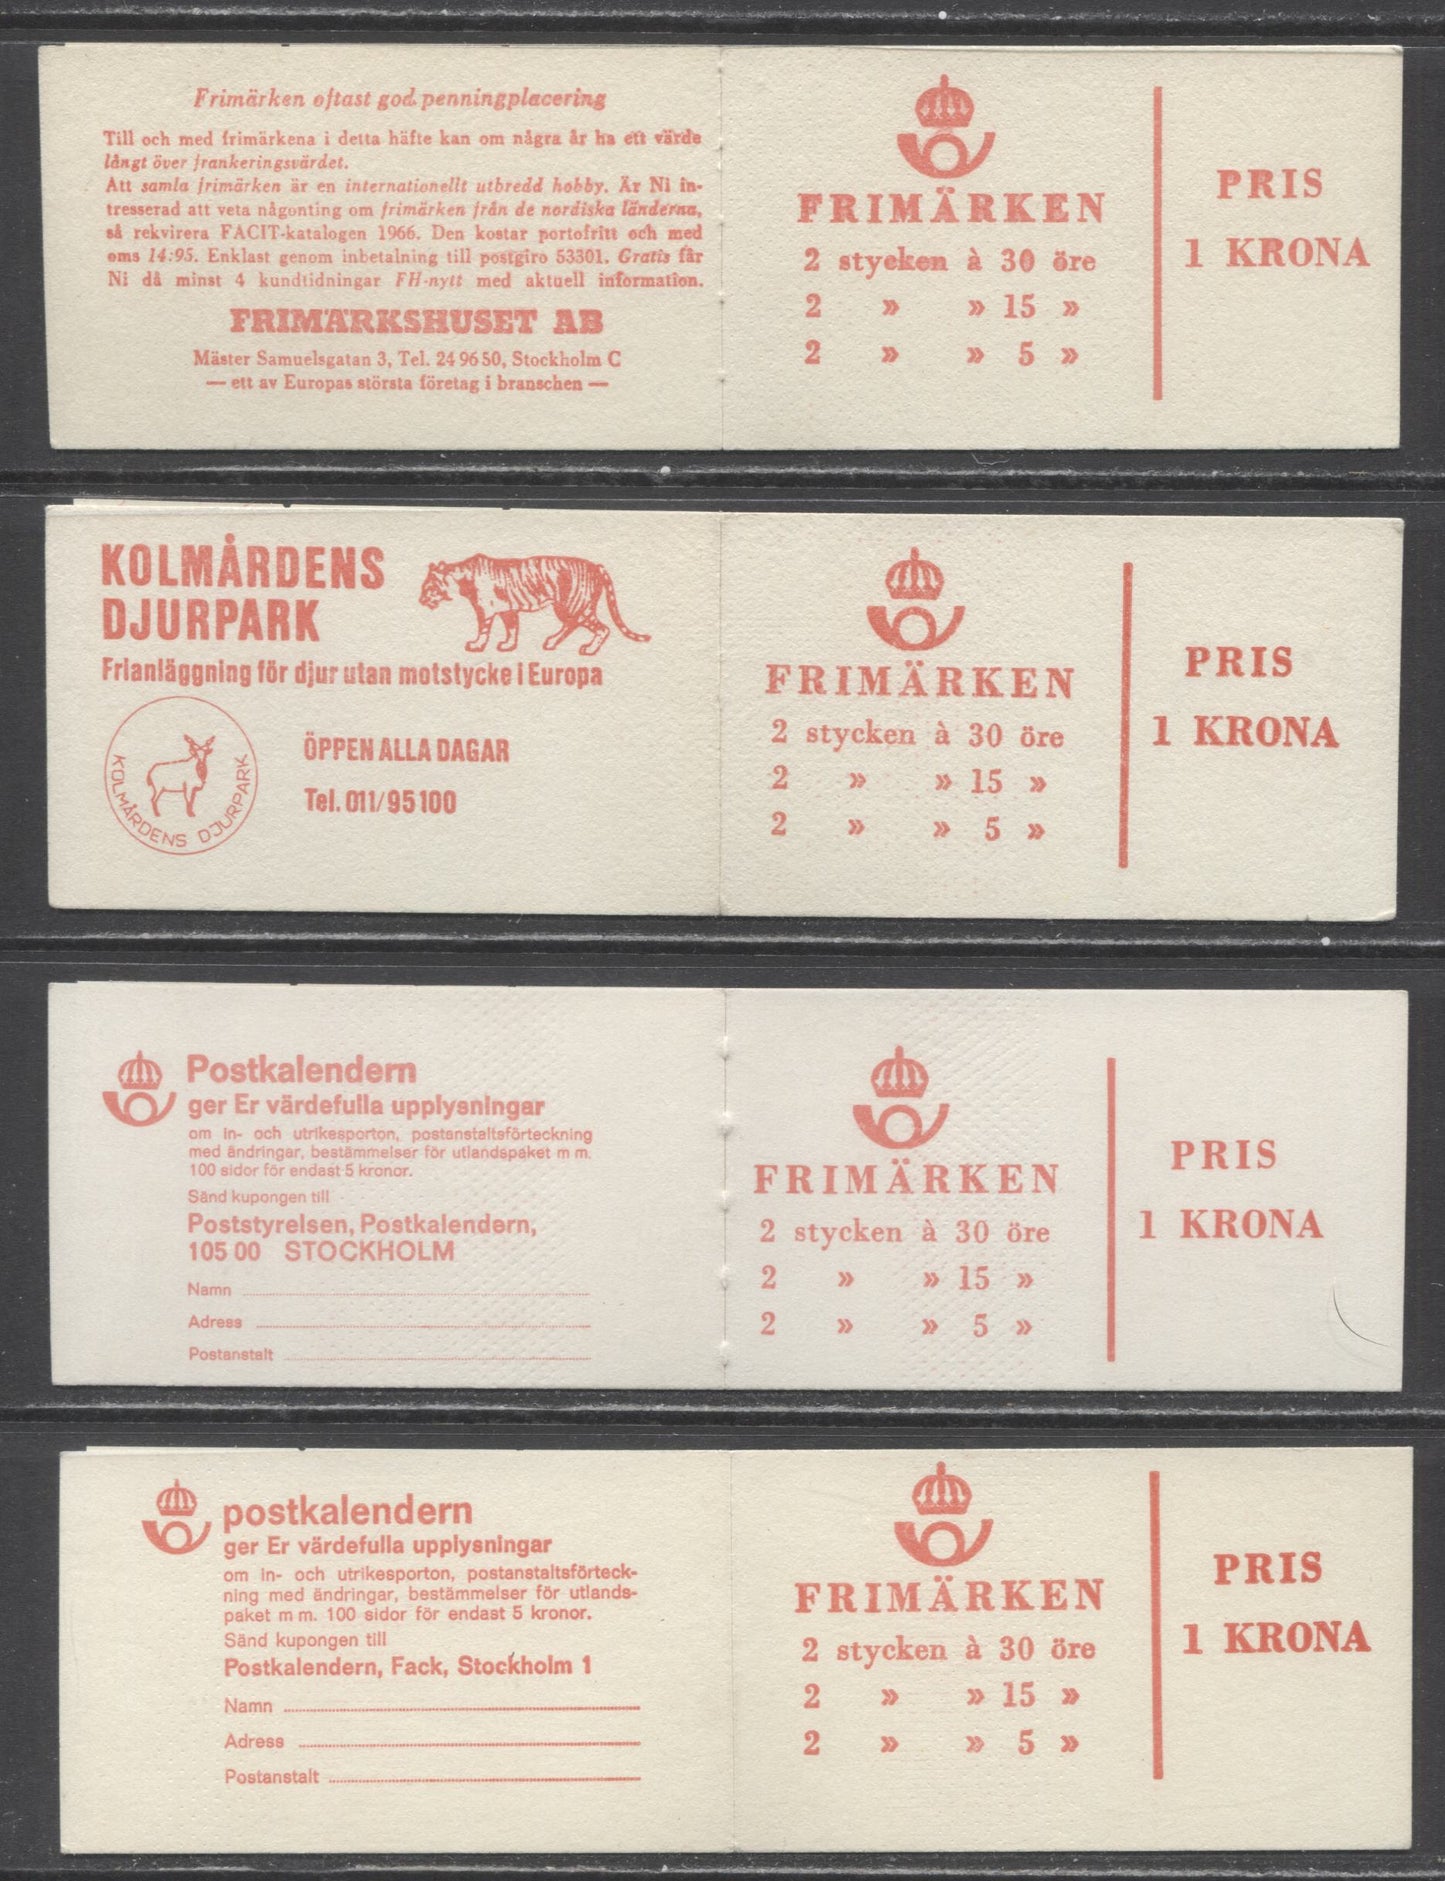 Lot 182 Sweden SC#668a (Facit #HA15AO)/668a (Facit #HA15D1O) 1966 King Gustav VI Adolf Definitive Issue, Different Cream and White Covers, Inverted Panes, Horizontal Cylinder 1 & 2 Markings, 4 VFNH Booklets of 6 (2 +2 +2), Estimated Value $16